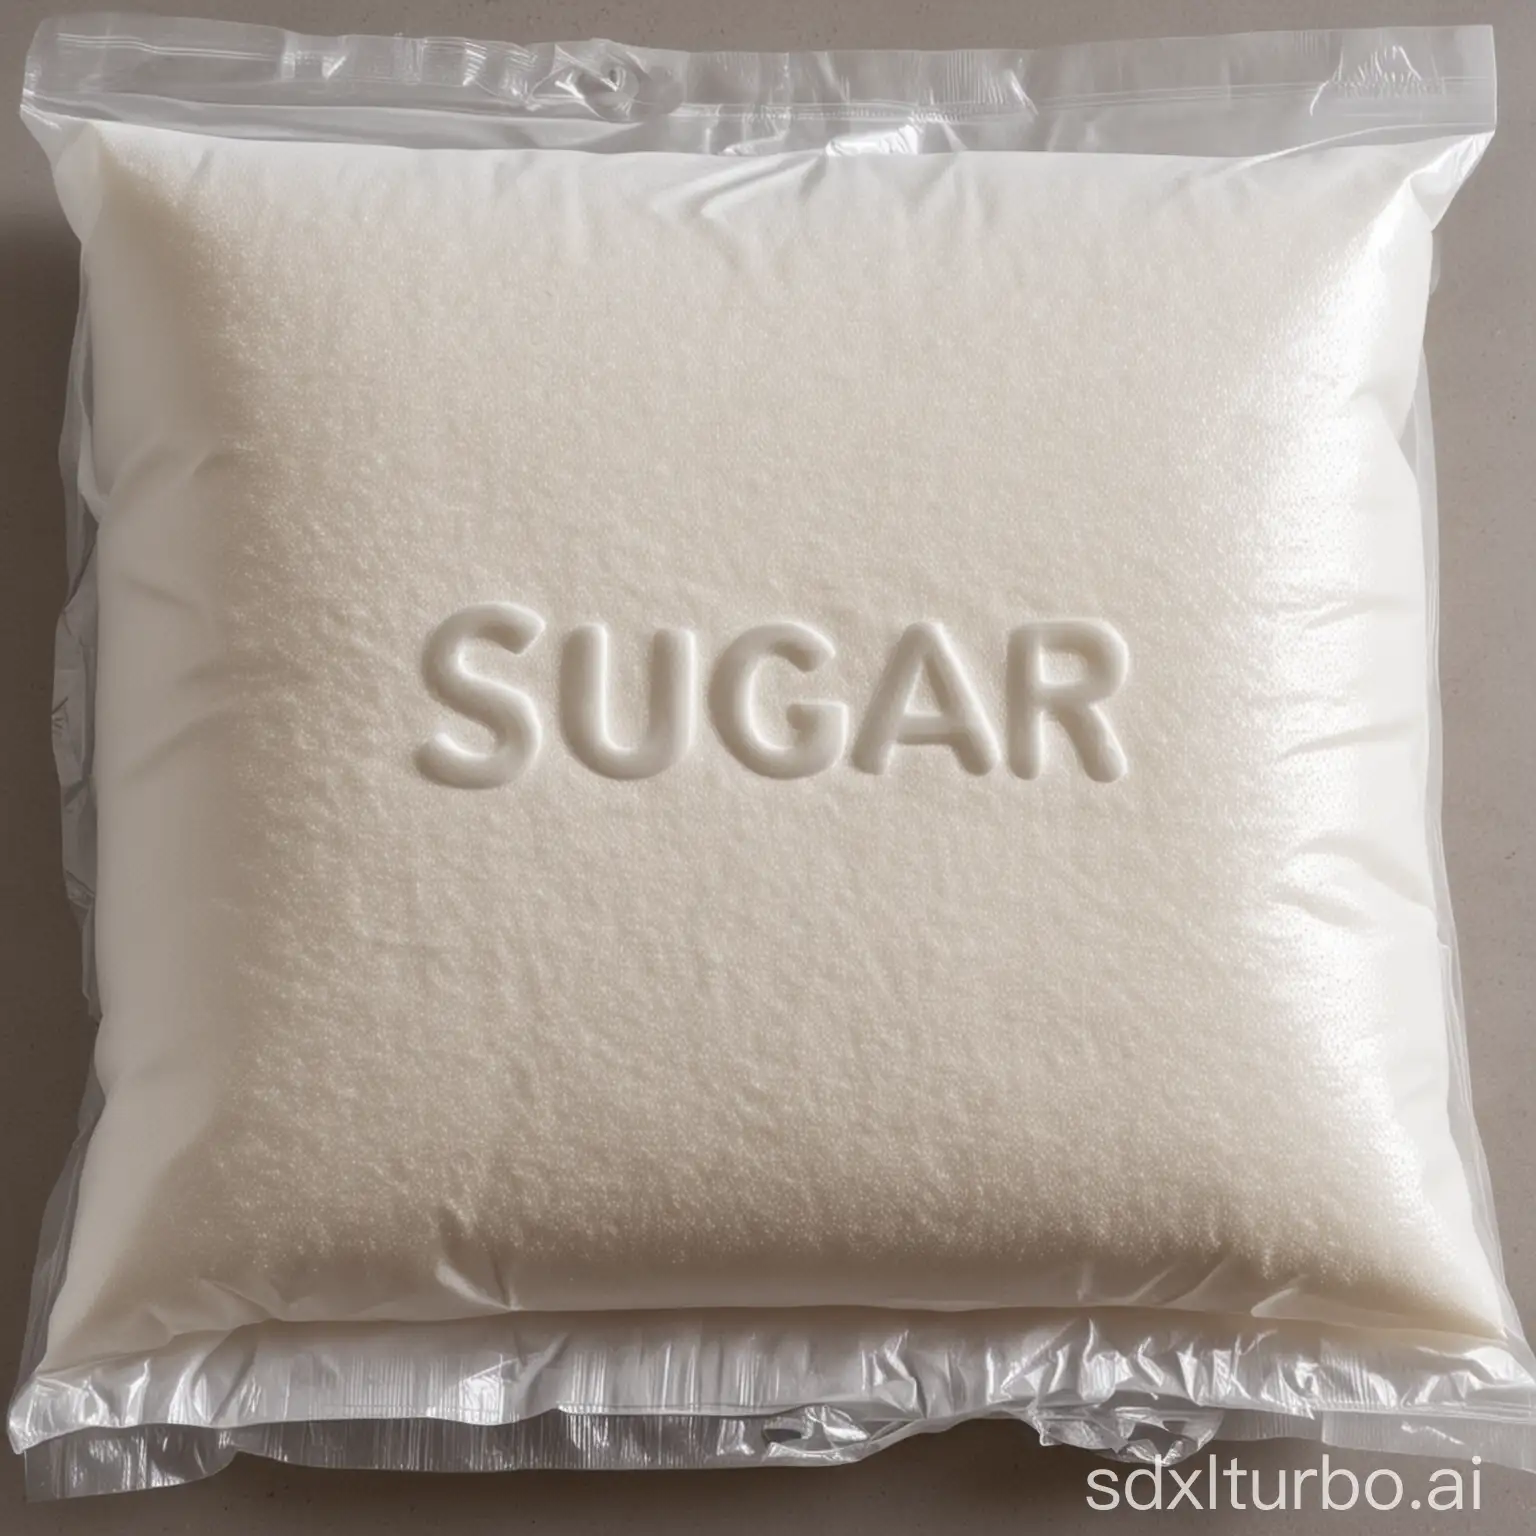 10-kg-White-Sugar-Packaging-with-Prominent-Label